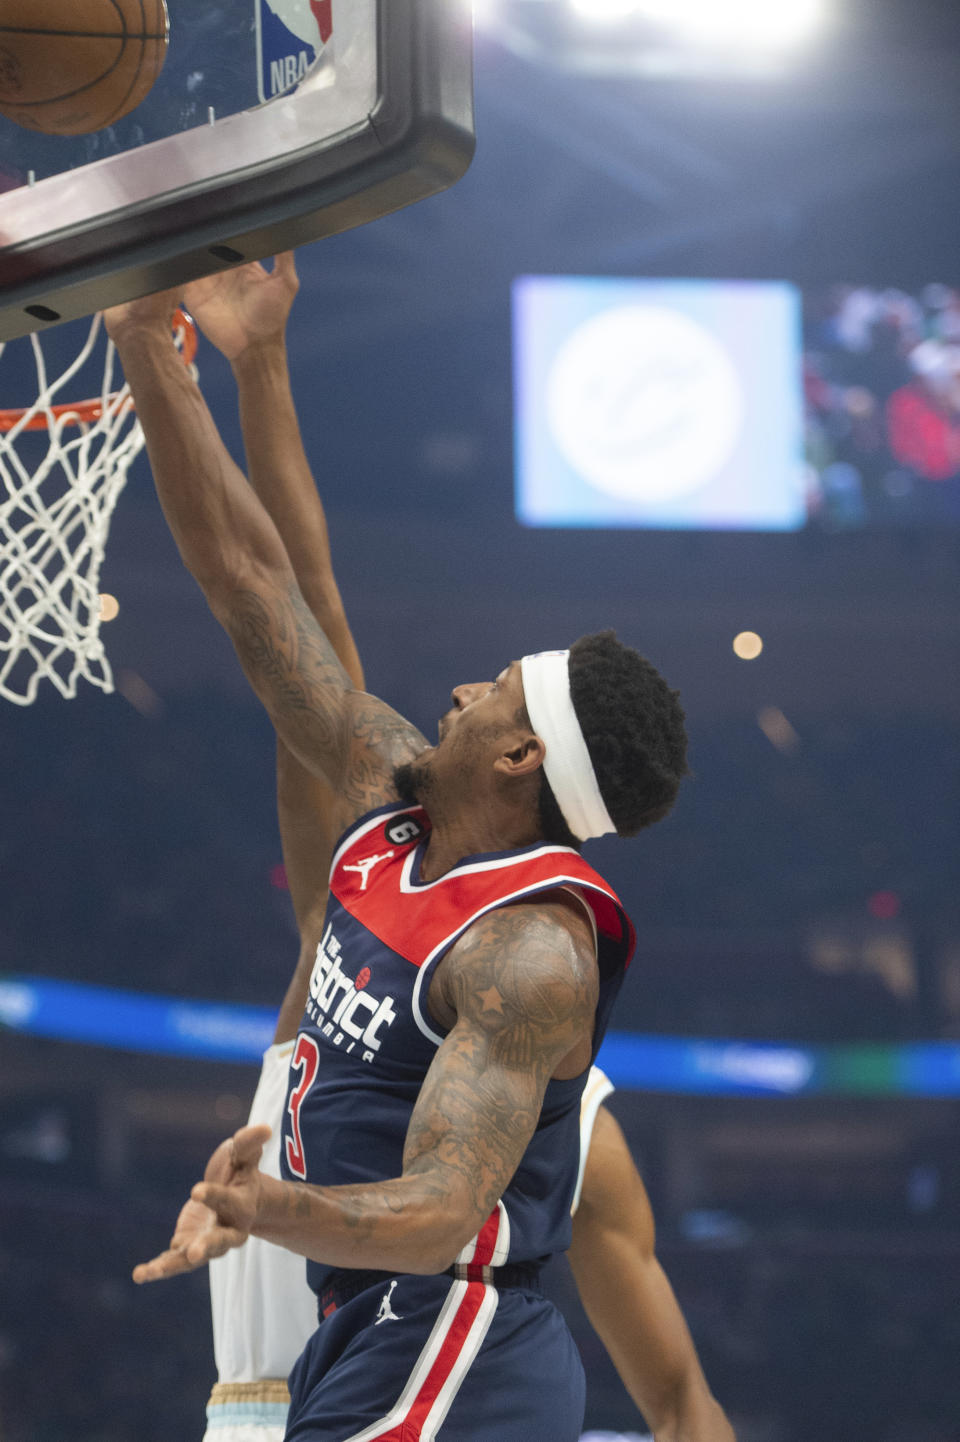 Washington Wizards' Bradley Beal (3) shoots against the Cleveland Cavaliers during the first half of an NBA basketball game in Cleveland, Friday, March 17, 2023. (AP Photo/Phil Long)